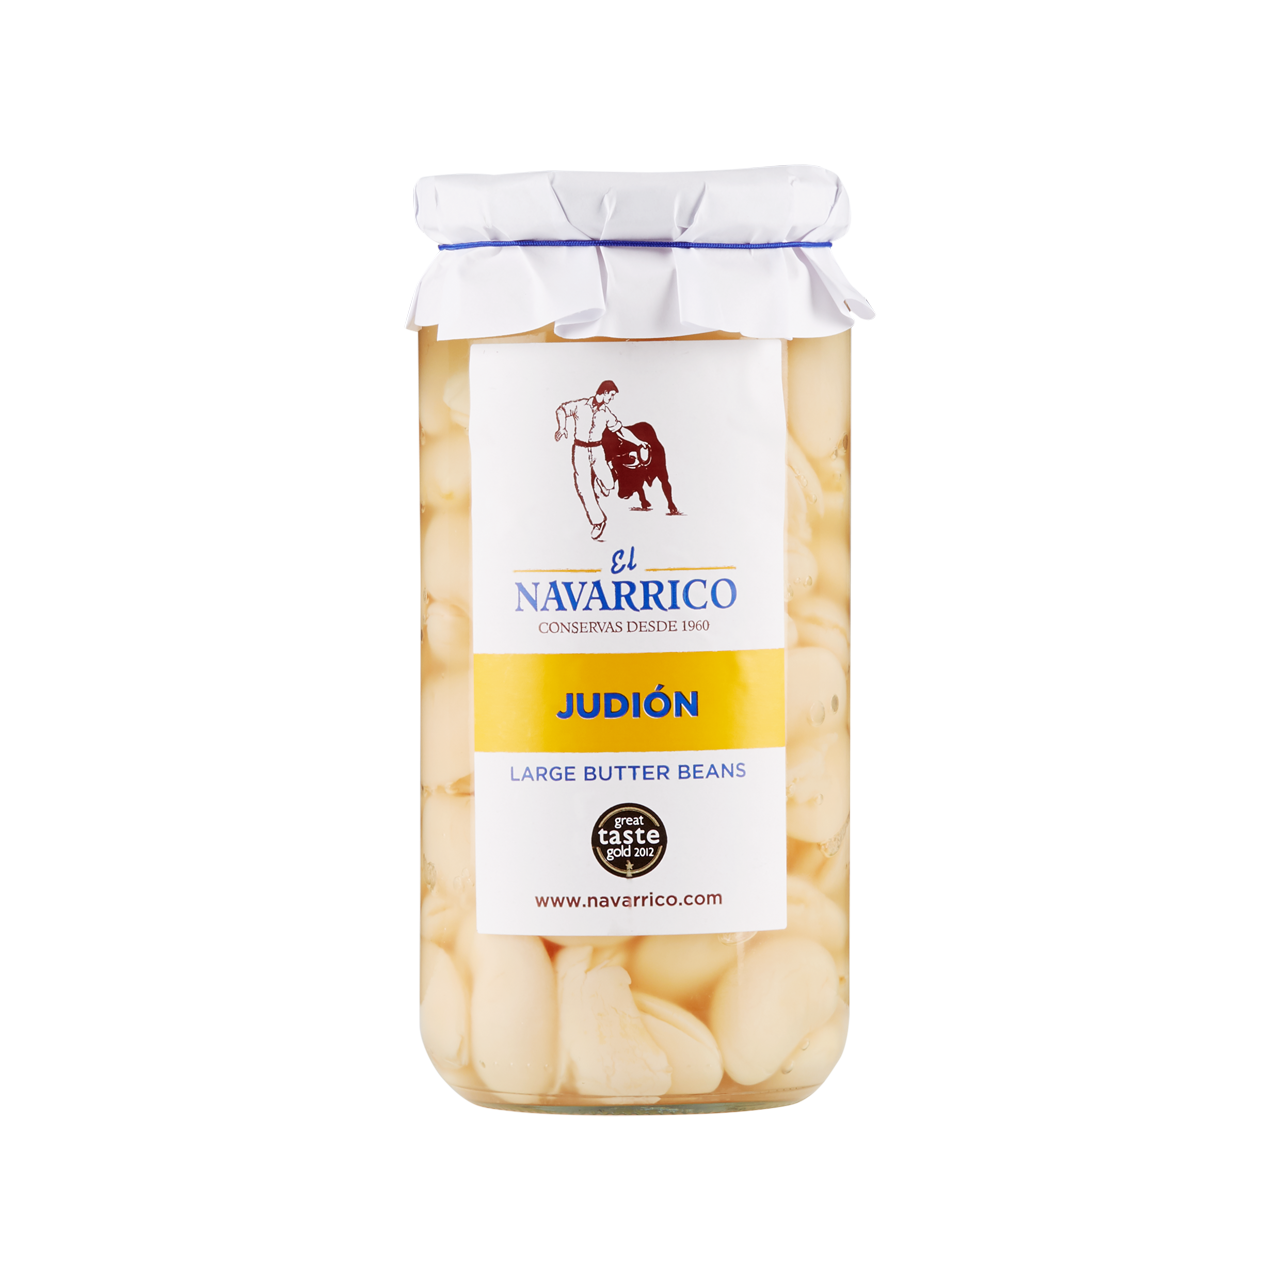 Navarrico Judion (large butter beans) Pulses